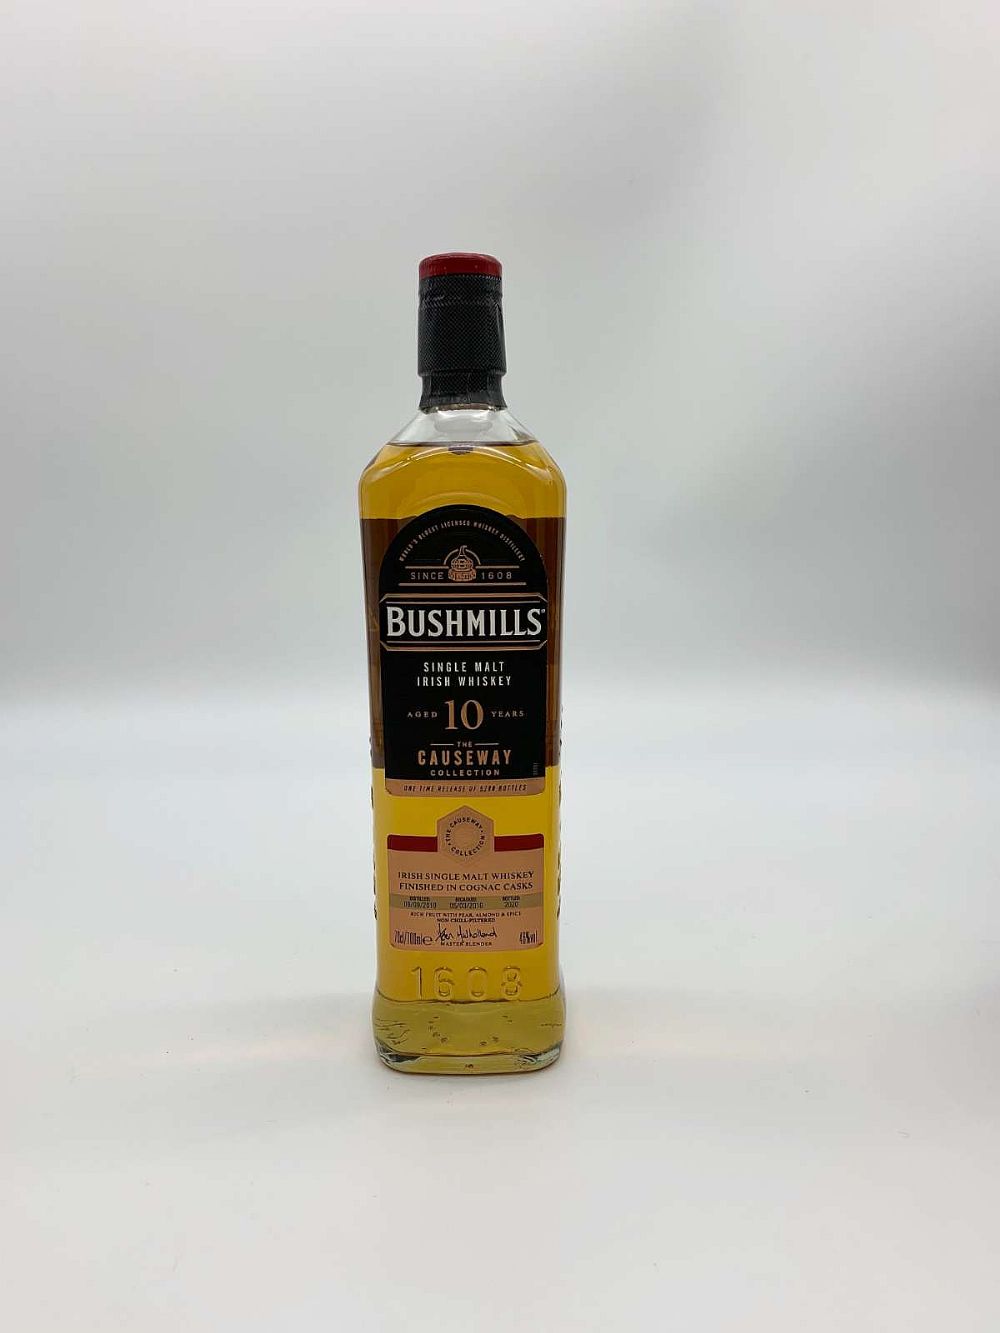 Bushmills Causeway Collection Cognac Cask Finish, 10 year old